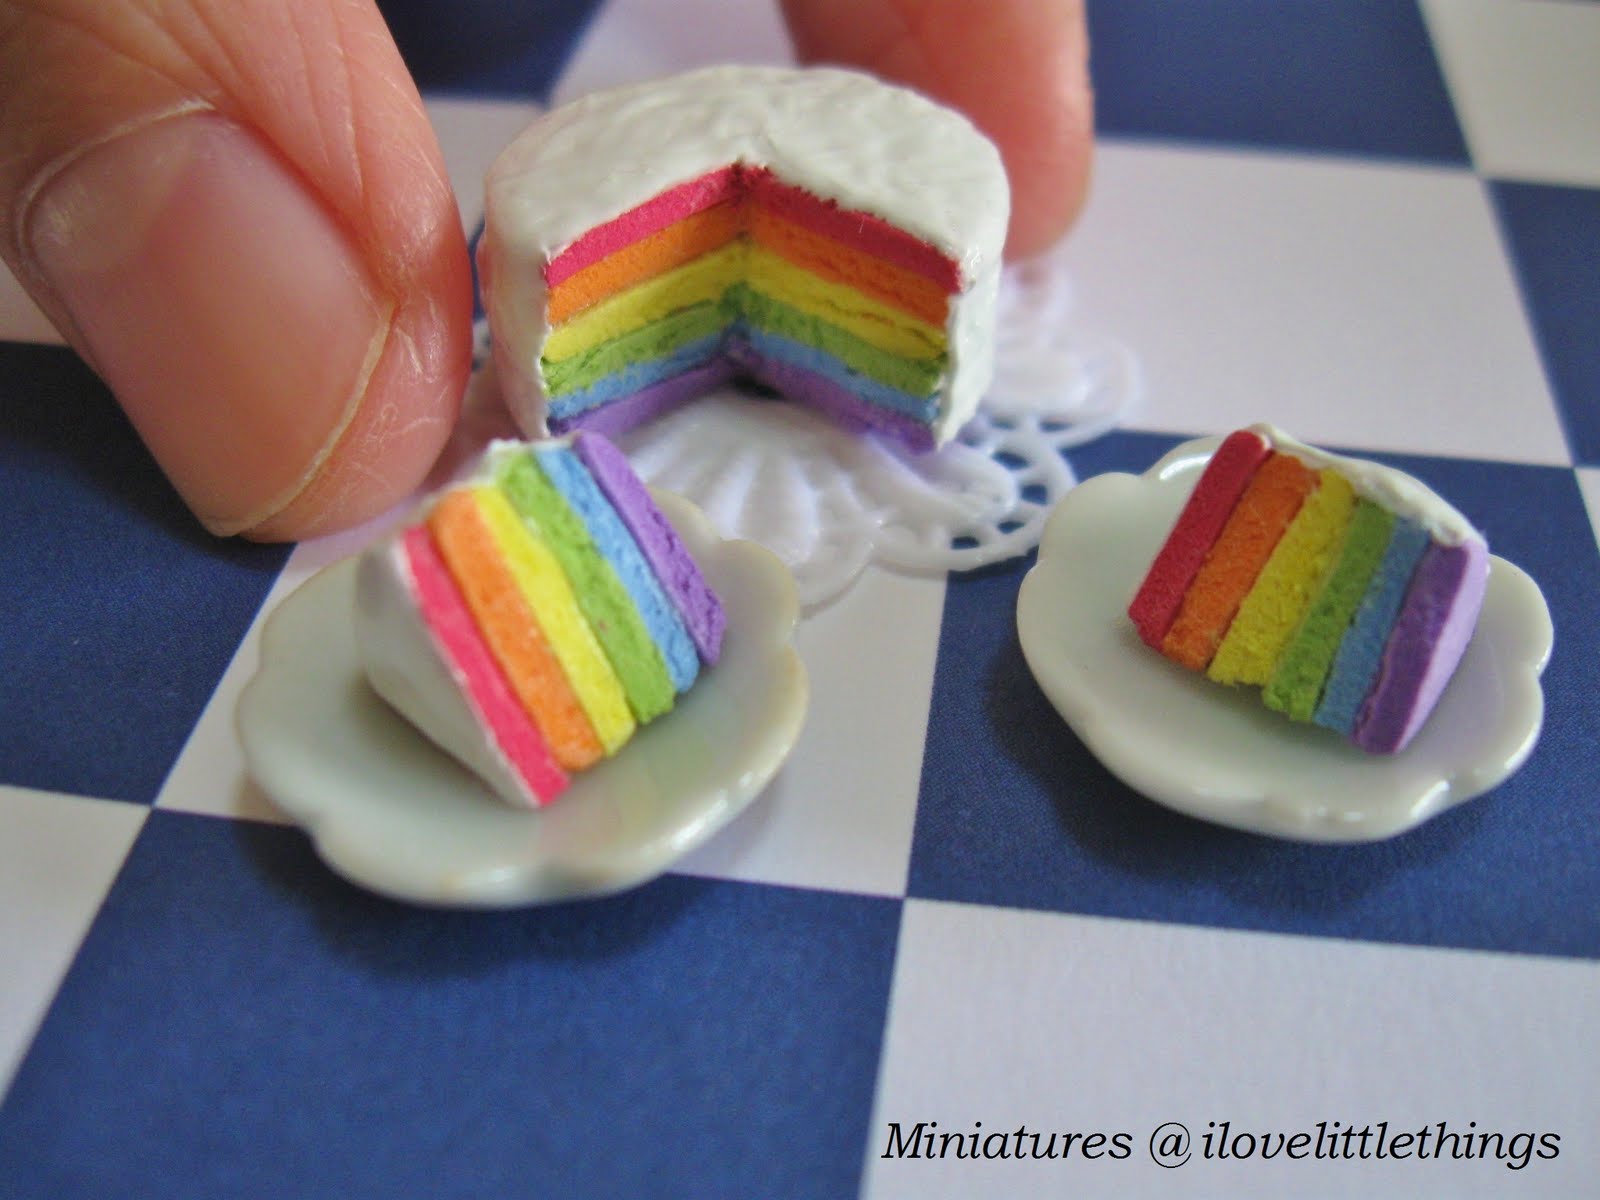 Making Miniature Food Using Air Dry Clay